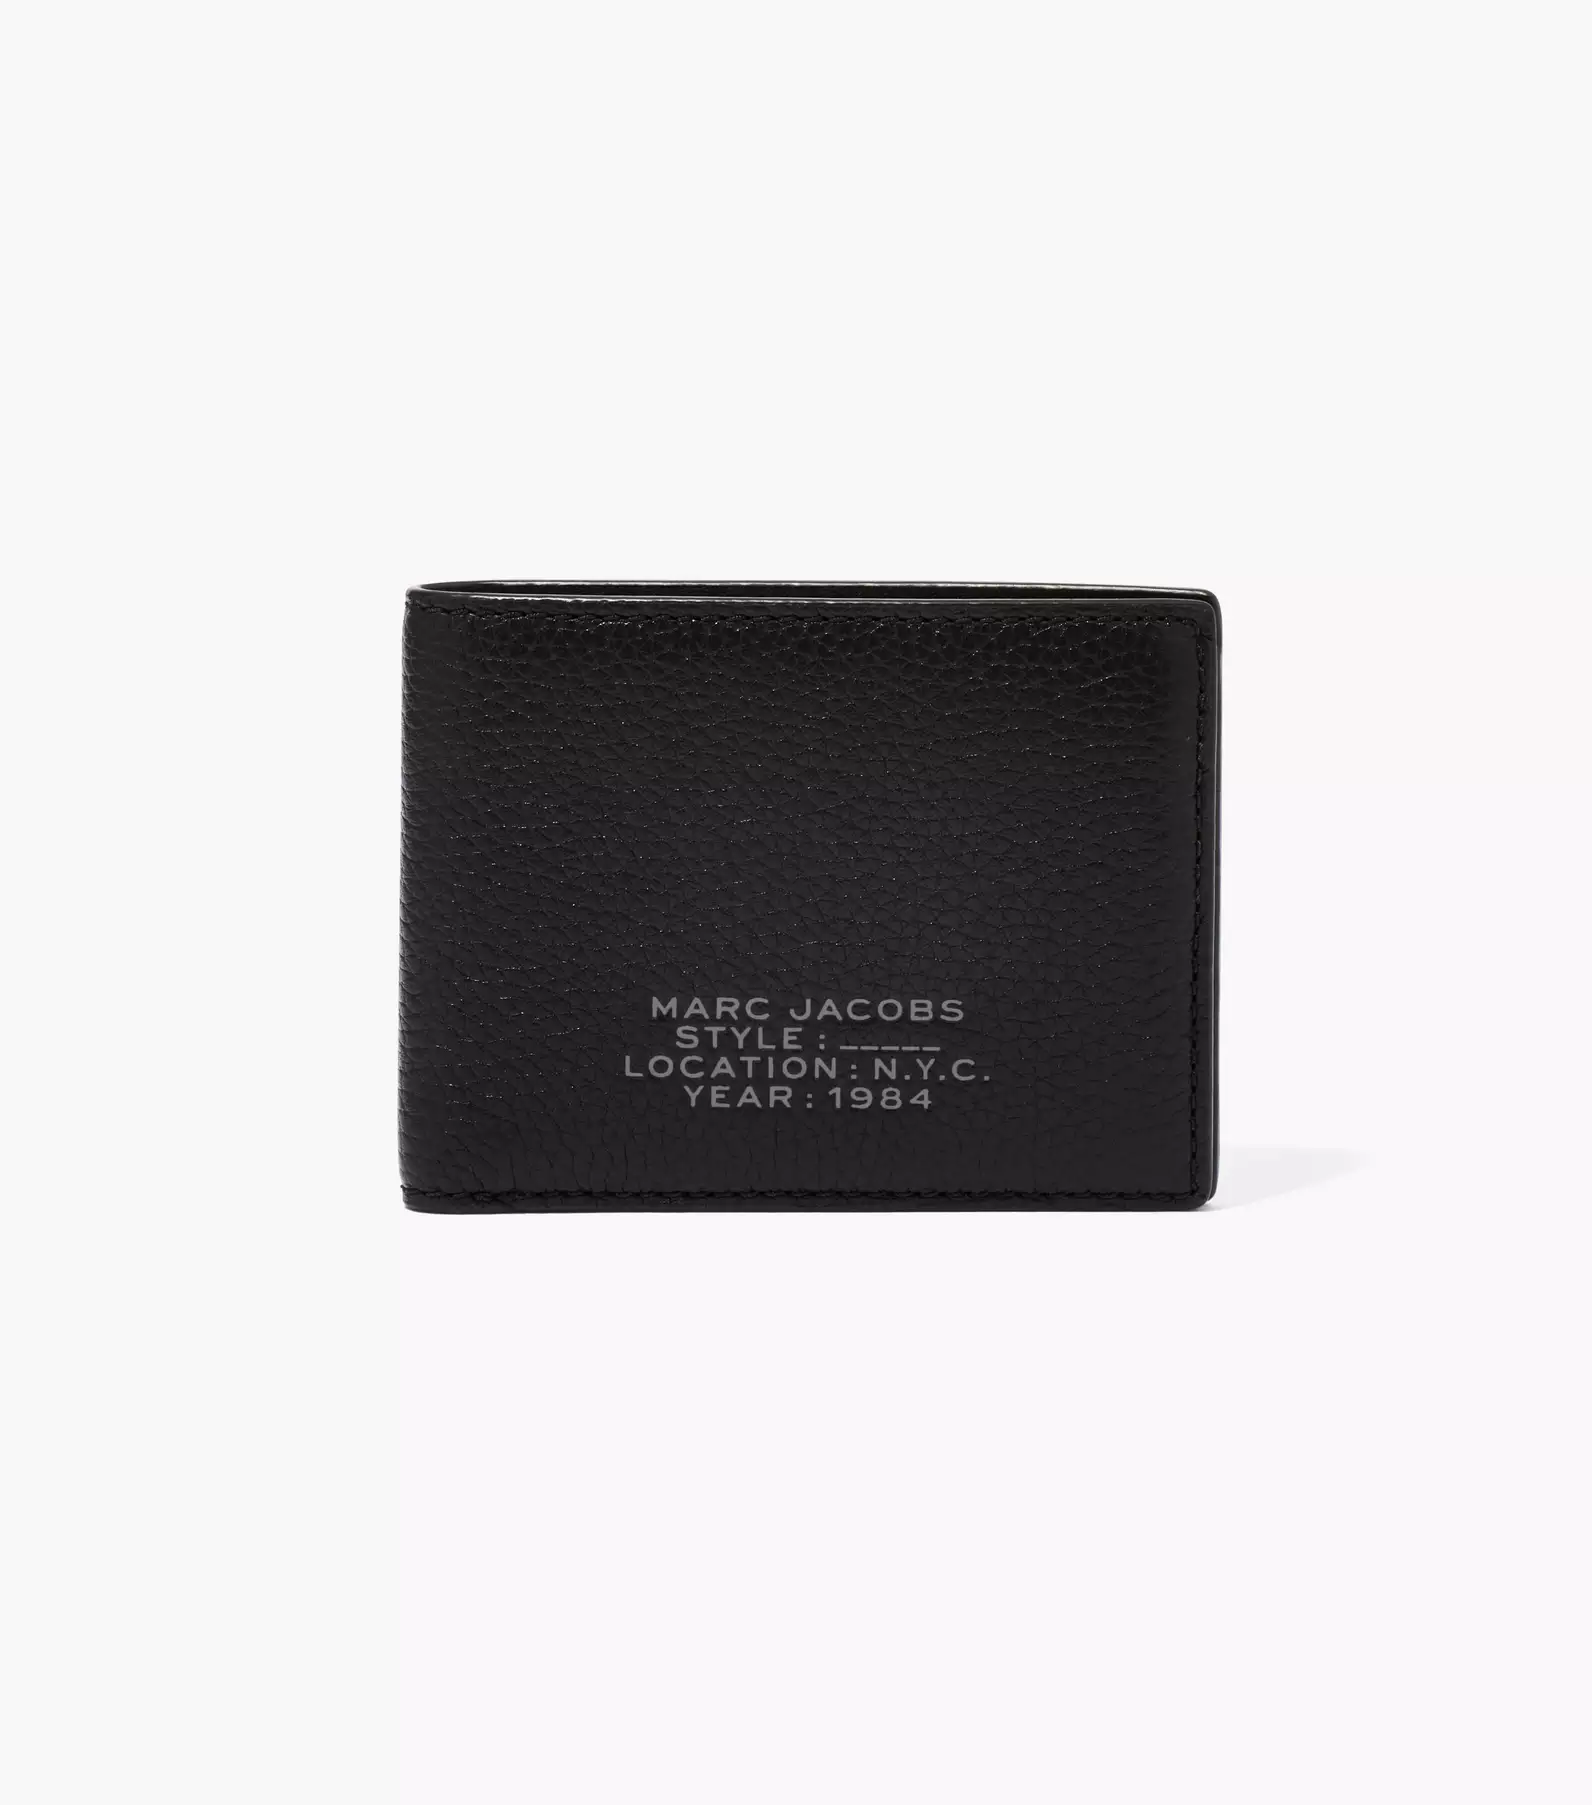 Louis Vuitton Leather Wallet, Leather Address Book Auction